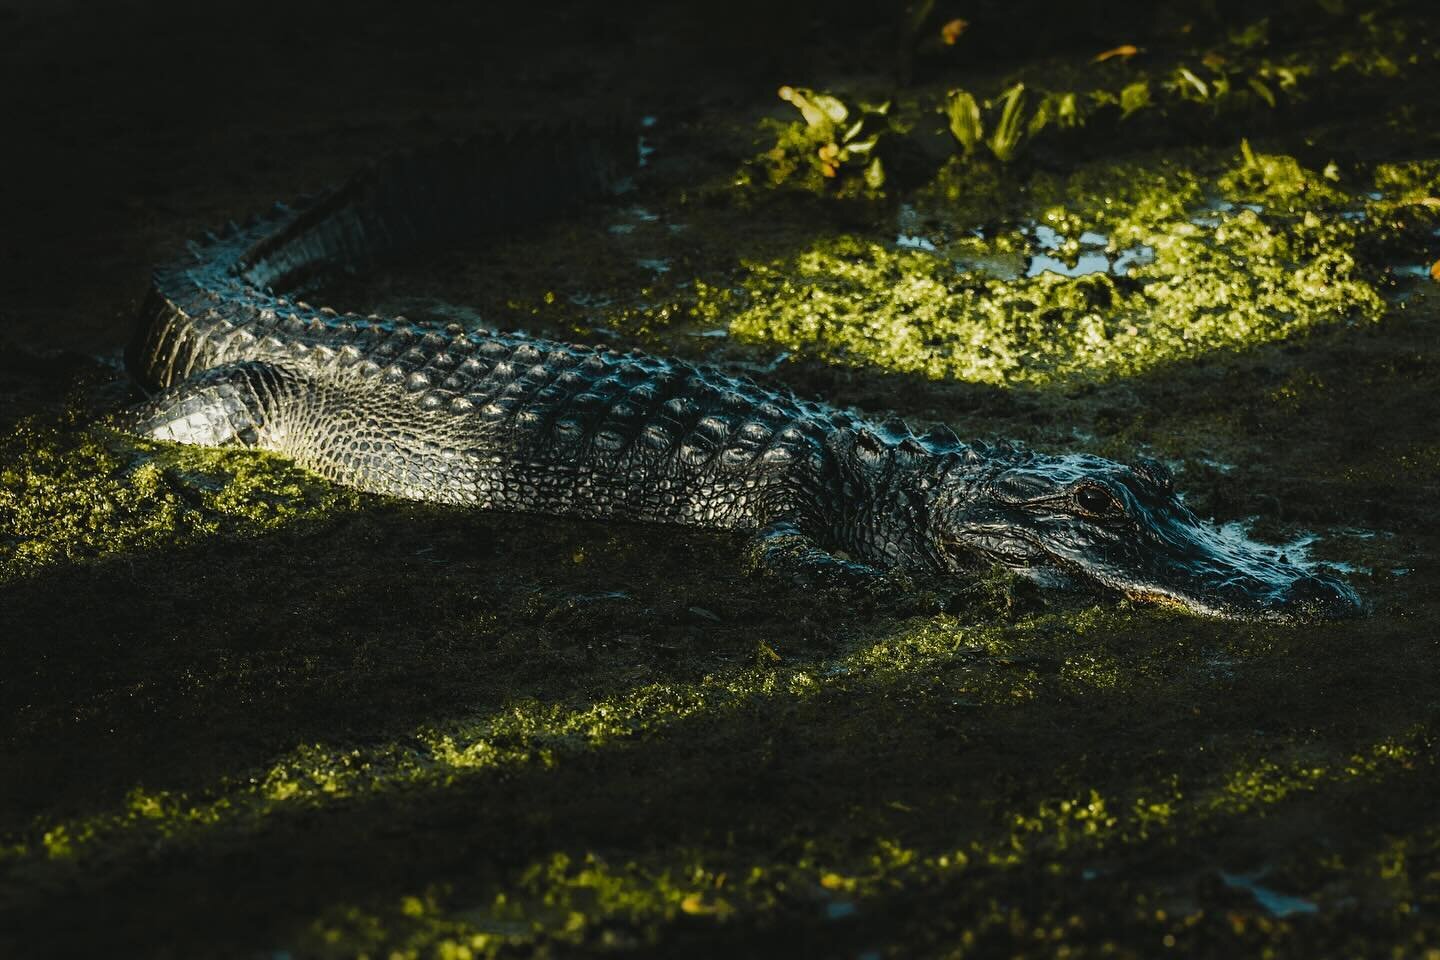 If yr cold, they&rsquo;re cold too. Bring those swamp puppies inside. 🐊 
 ⠀⠀⠀⠀⠀⠀⠀⠀⠀⠀⠀⠀ 
 ⠀⠀⠀⠀⠀⠀⠀⠀⠀⠀⠀⠀ 
#floridagators #becksranch #floridawildlife #gator
#floridawildlife #alligator #gators #alligators #sunkiss
#wanderlust #adventuring #floridawild 